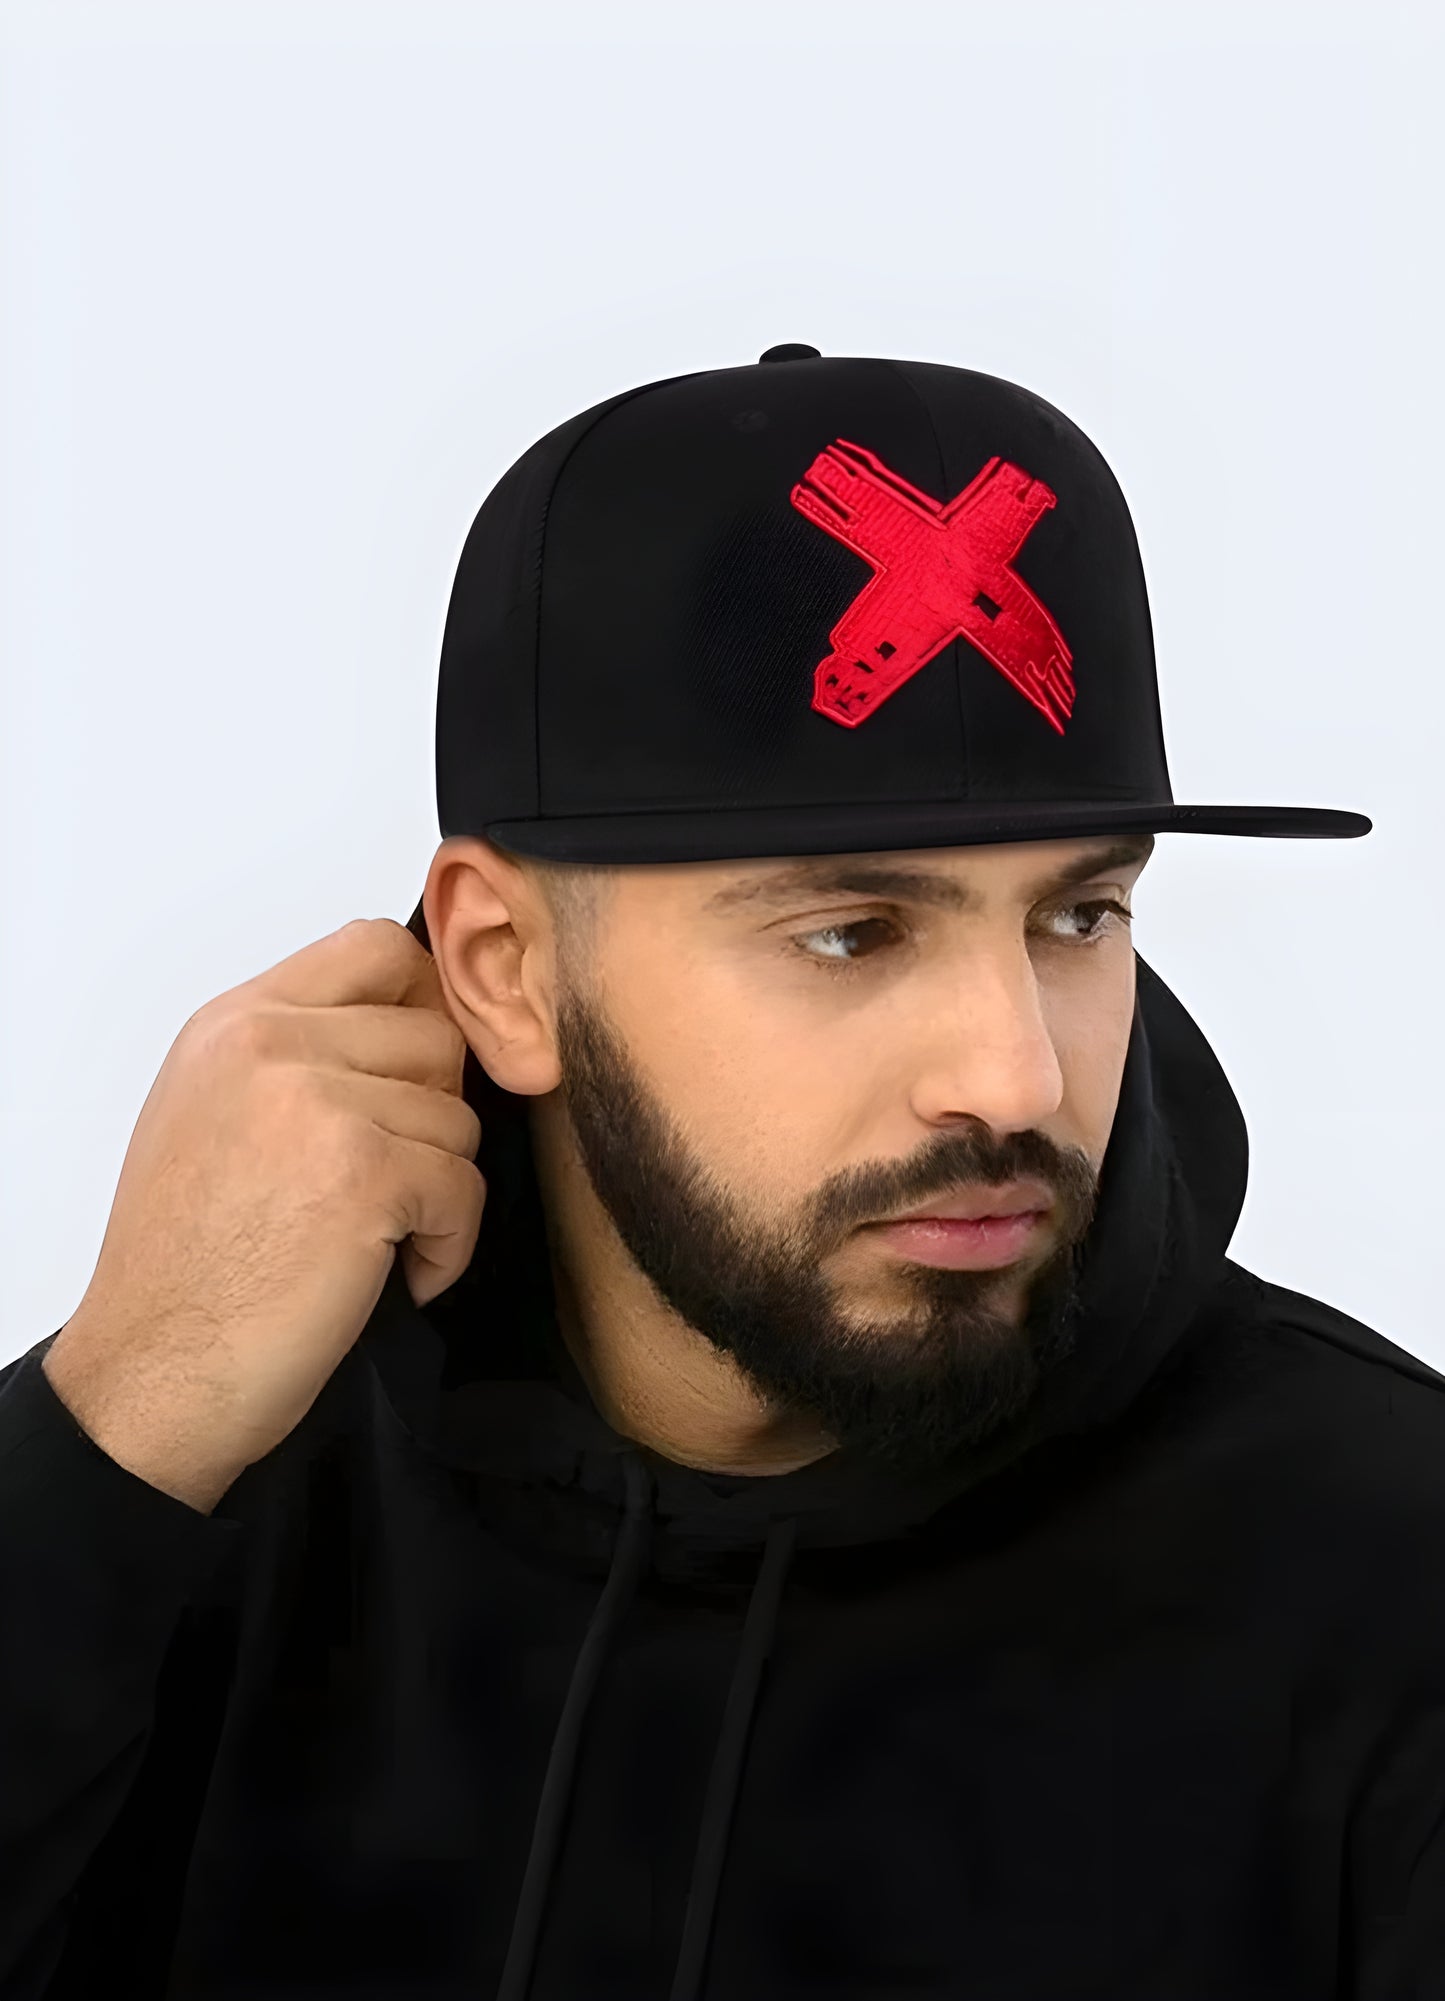  This classic baseball hat features a unique cross logo and curved bill, adding a touch of edge to any outfit. 